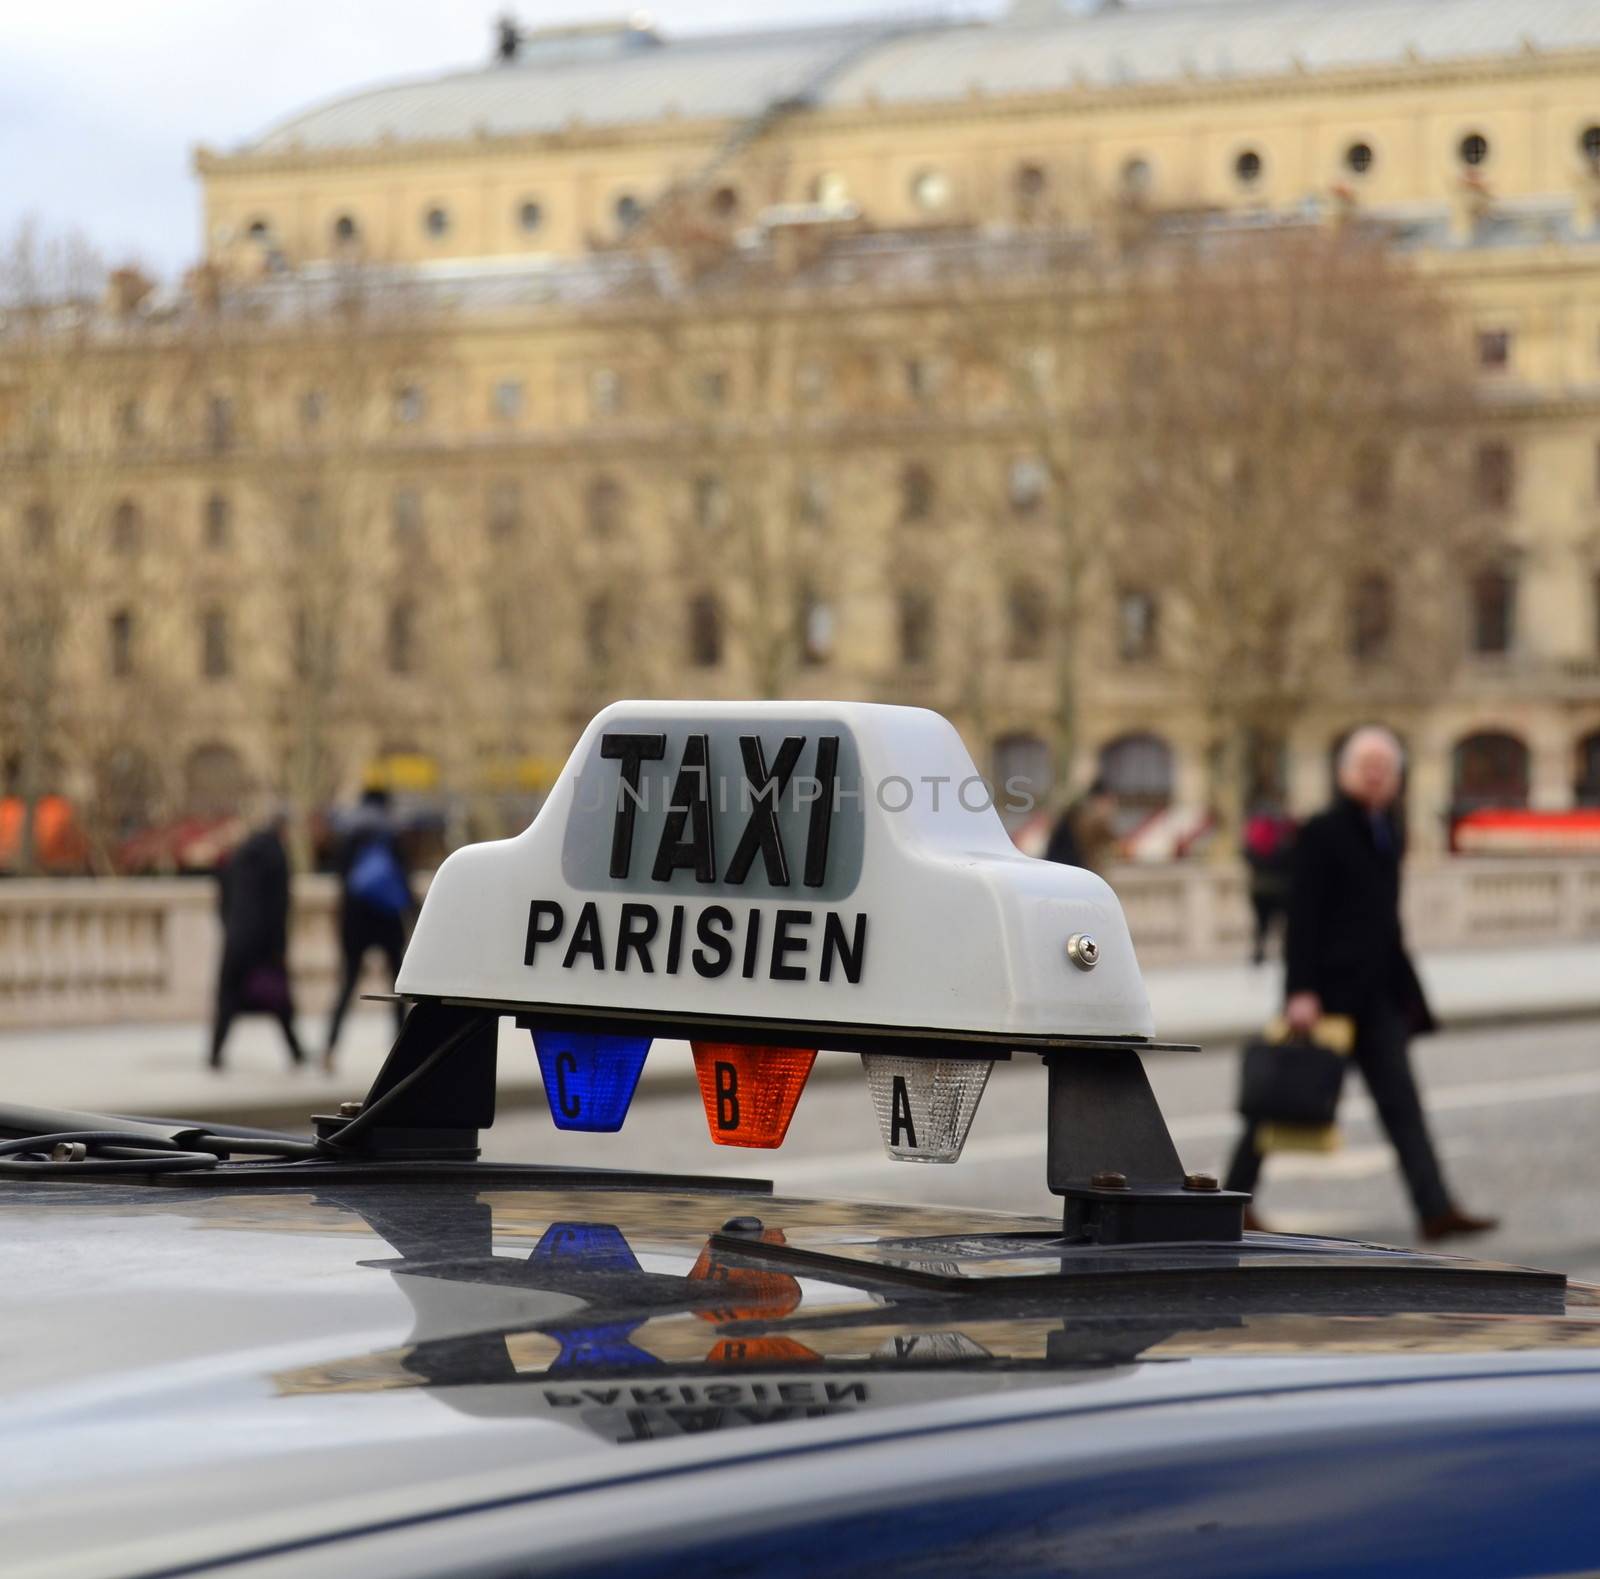 A Paris Taxi On A Bridge Over The River Seine With People In The Background